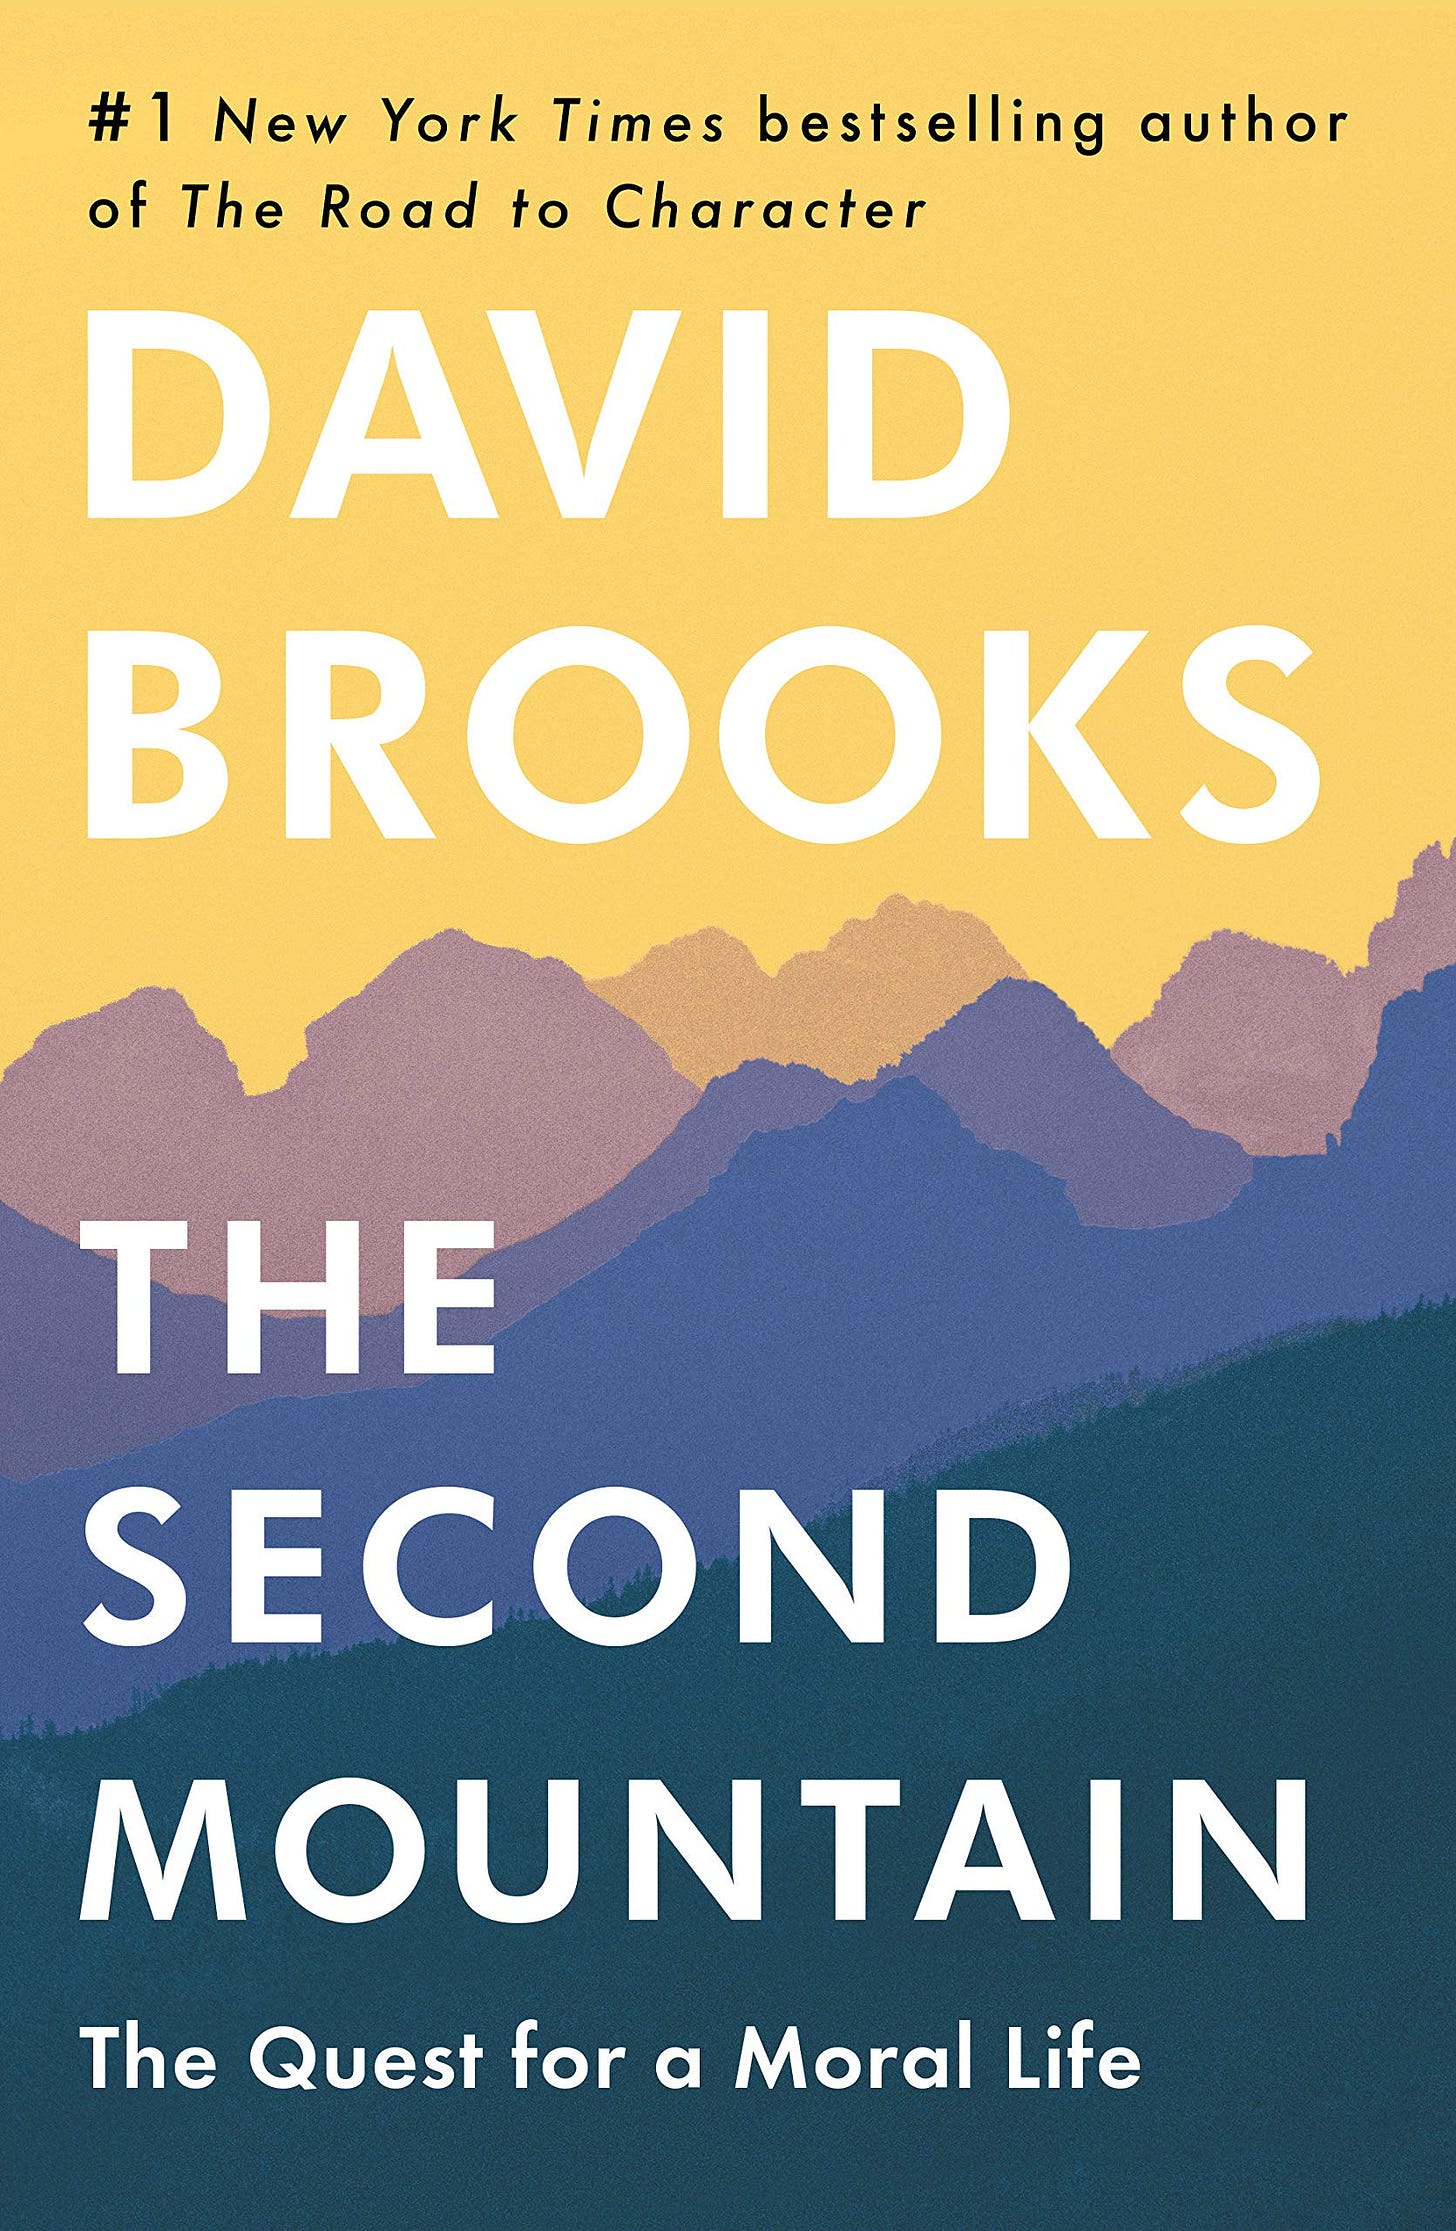 The Second Mountain: The Quest for a Moral Life: Brooks, David:  9780812993264: Amazon.com: Books